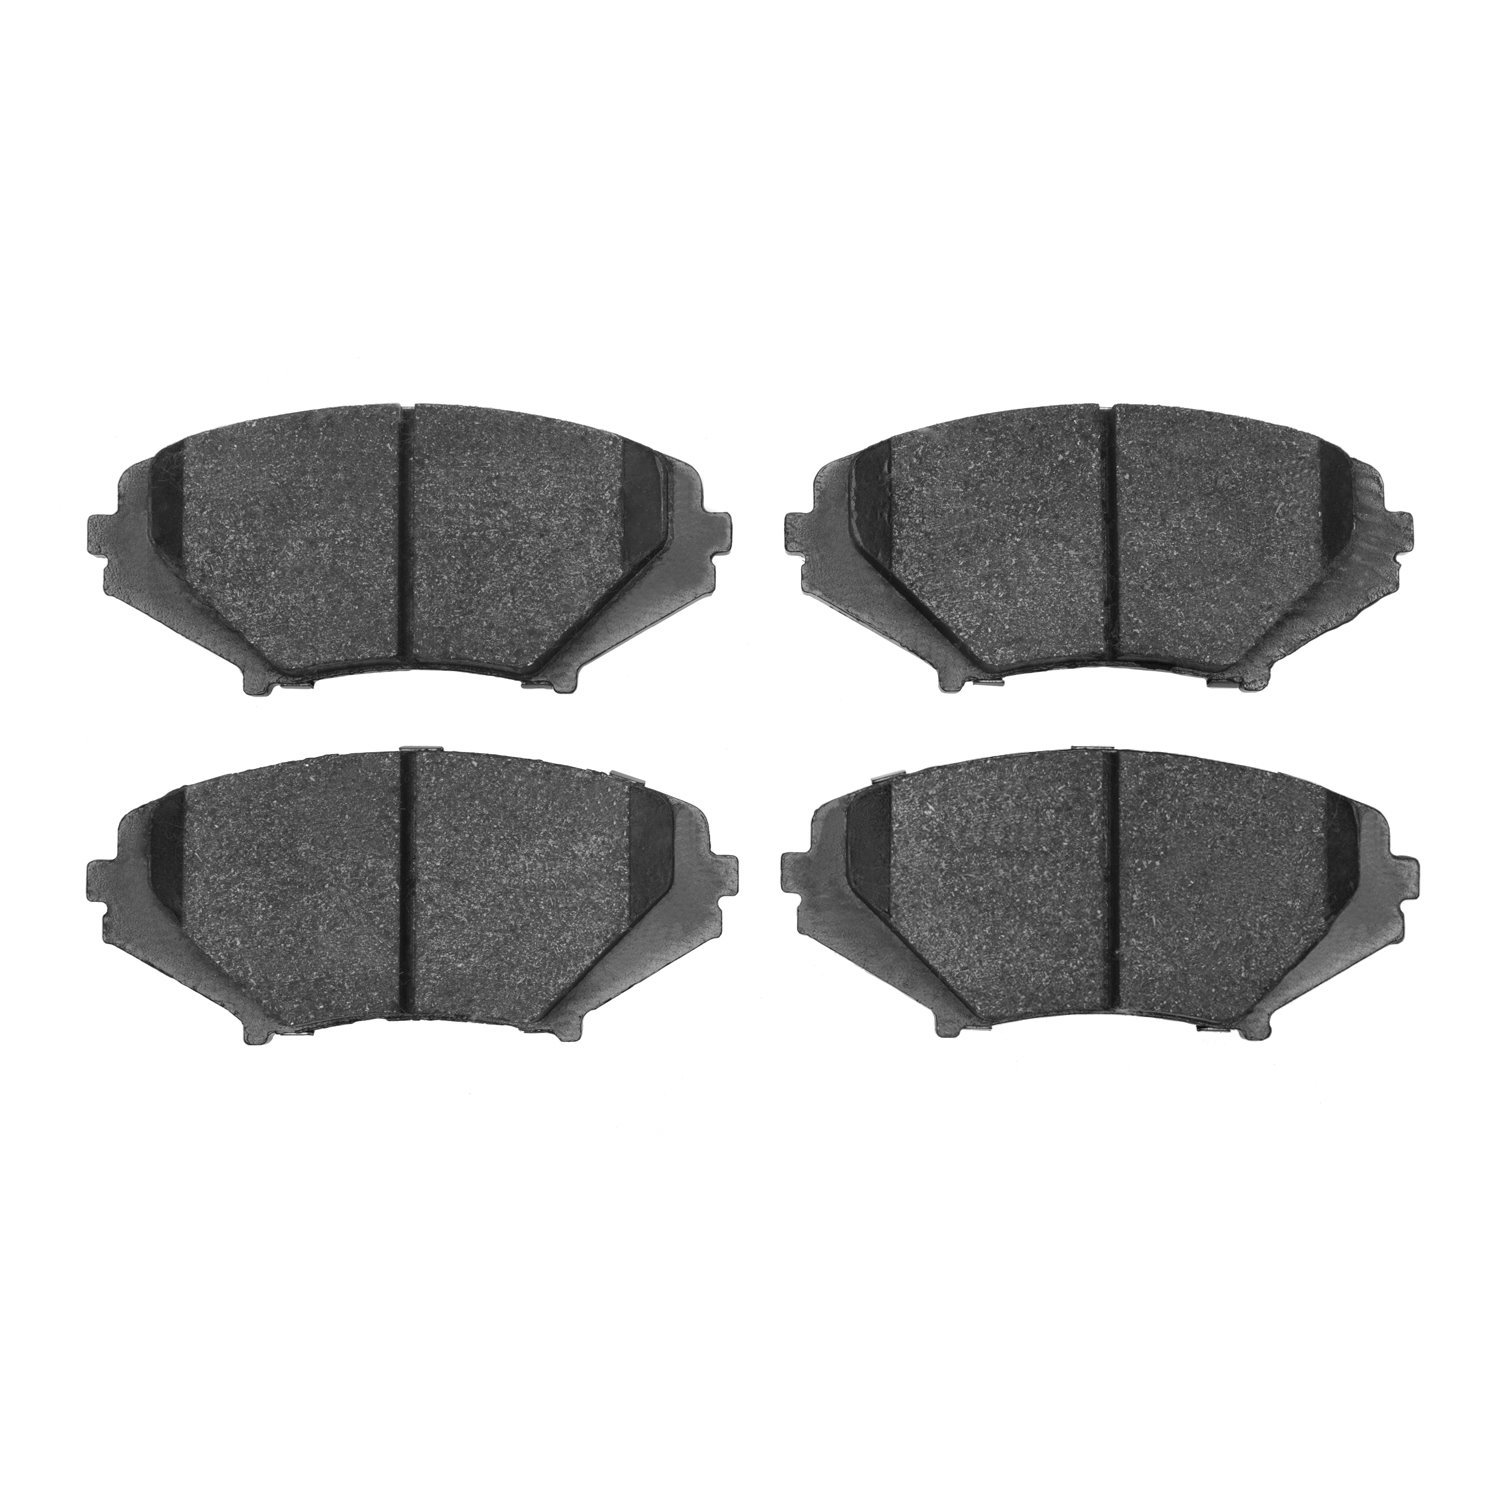 1310-1009-00 3000-Series Ceramic Brake Pads, 2004-2011 Ford/Lincoln/Mercury/Mazda, Position: Front